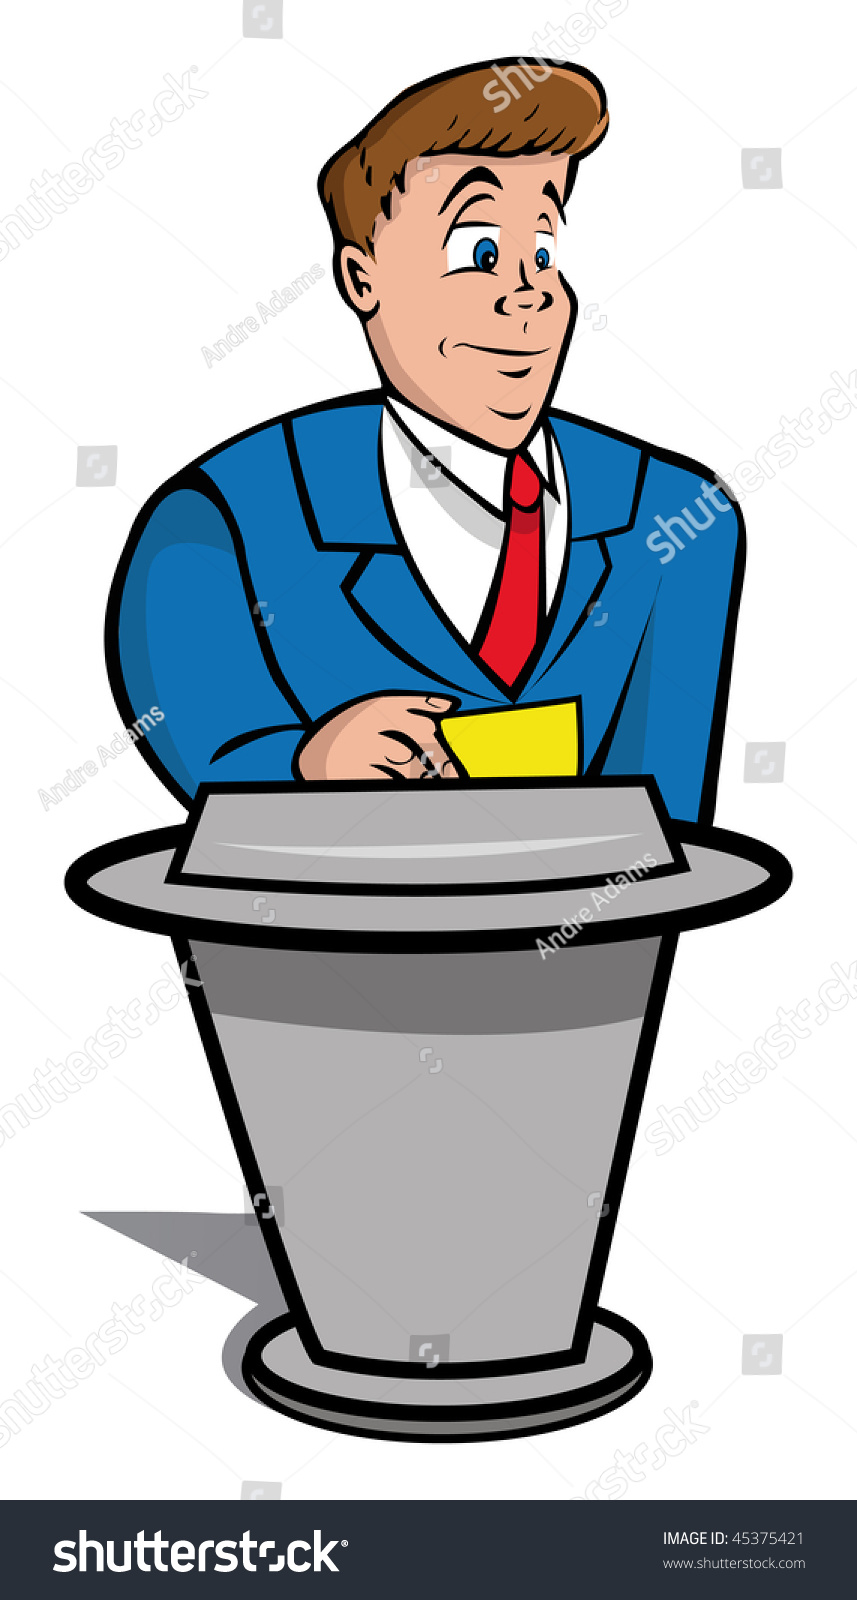 clipart game show host - photo #7